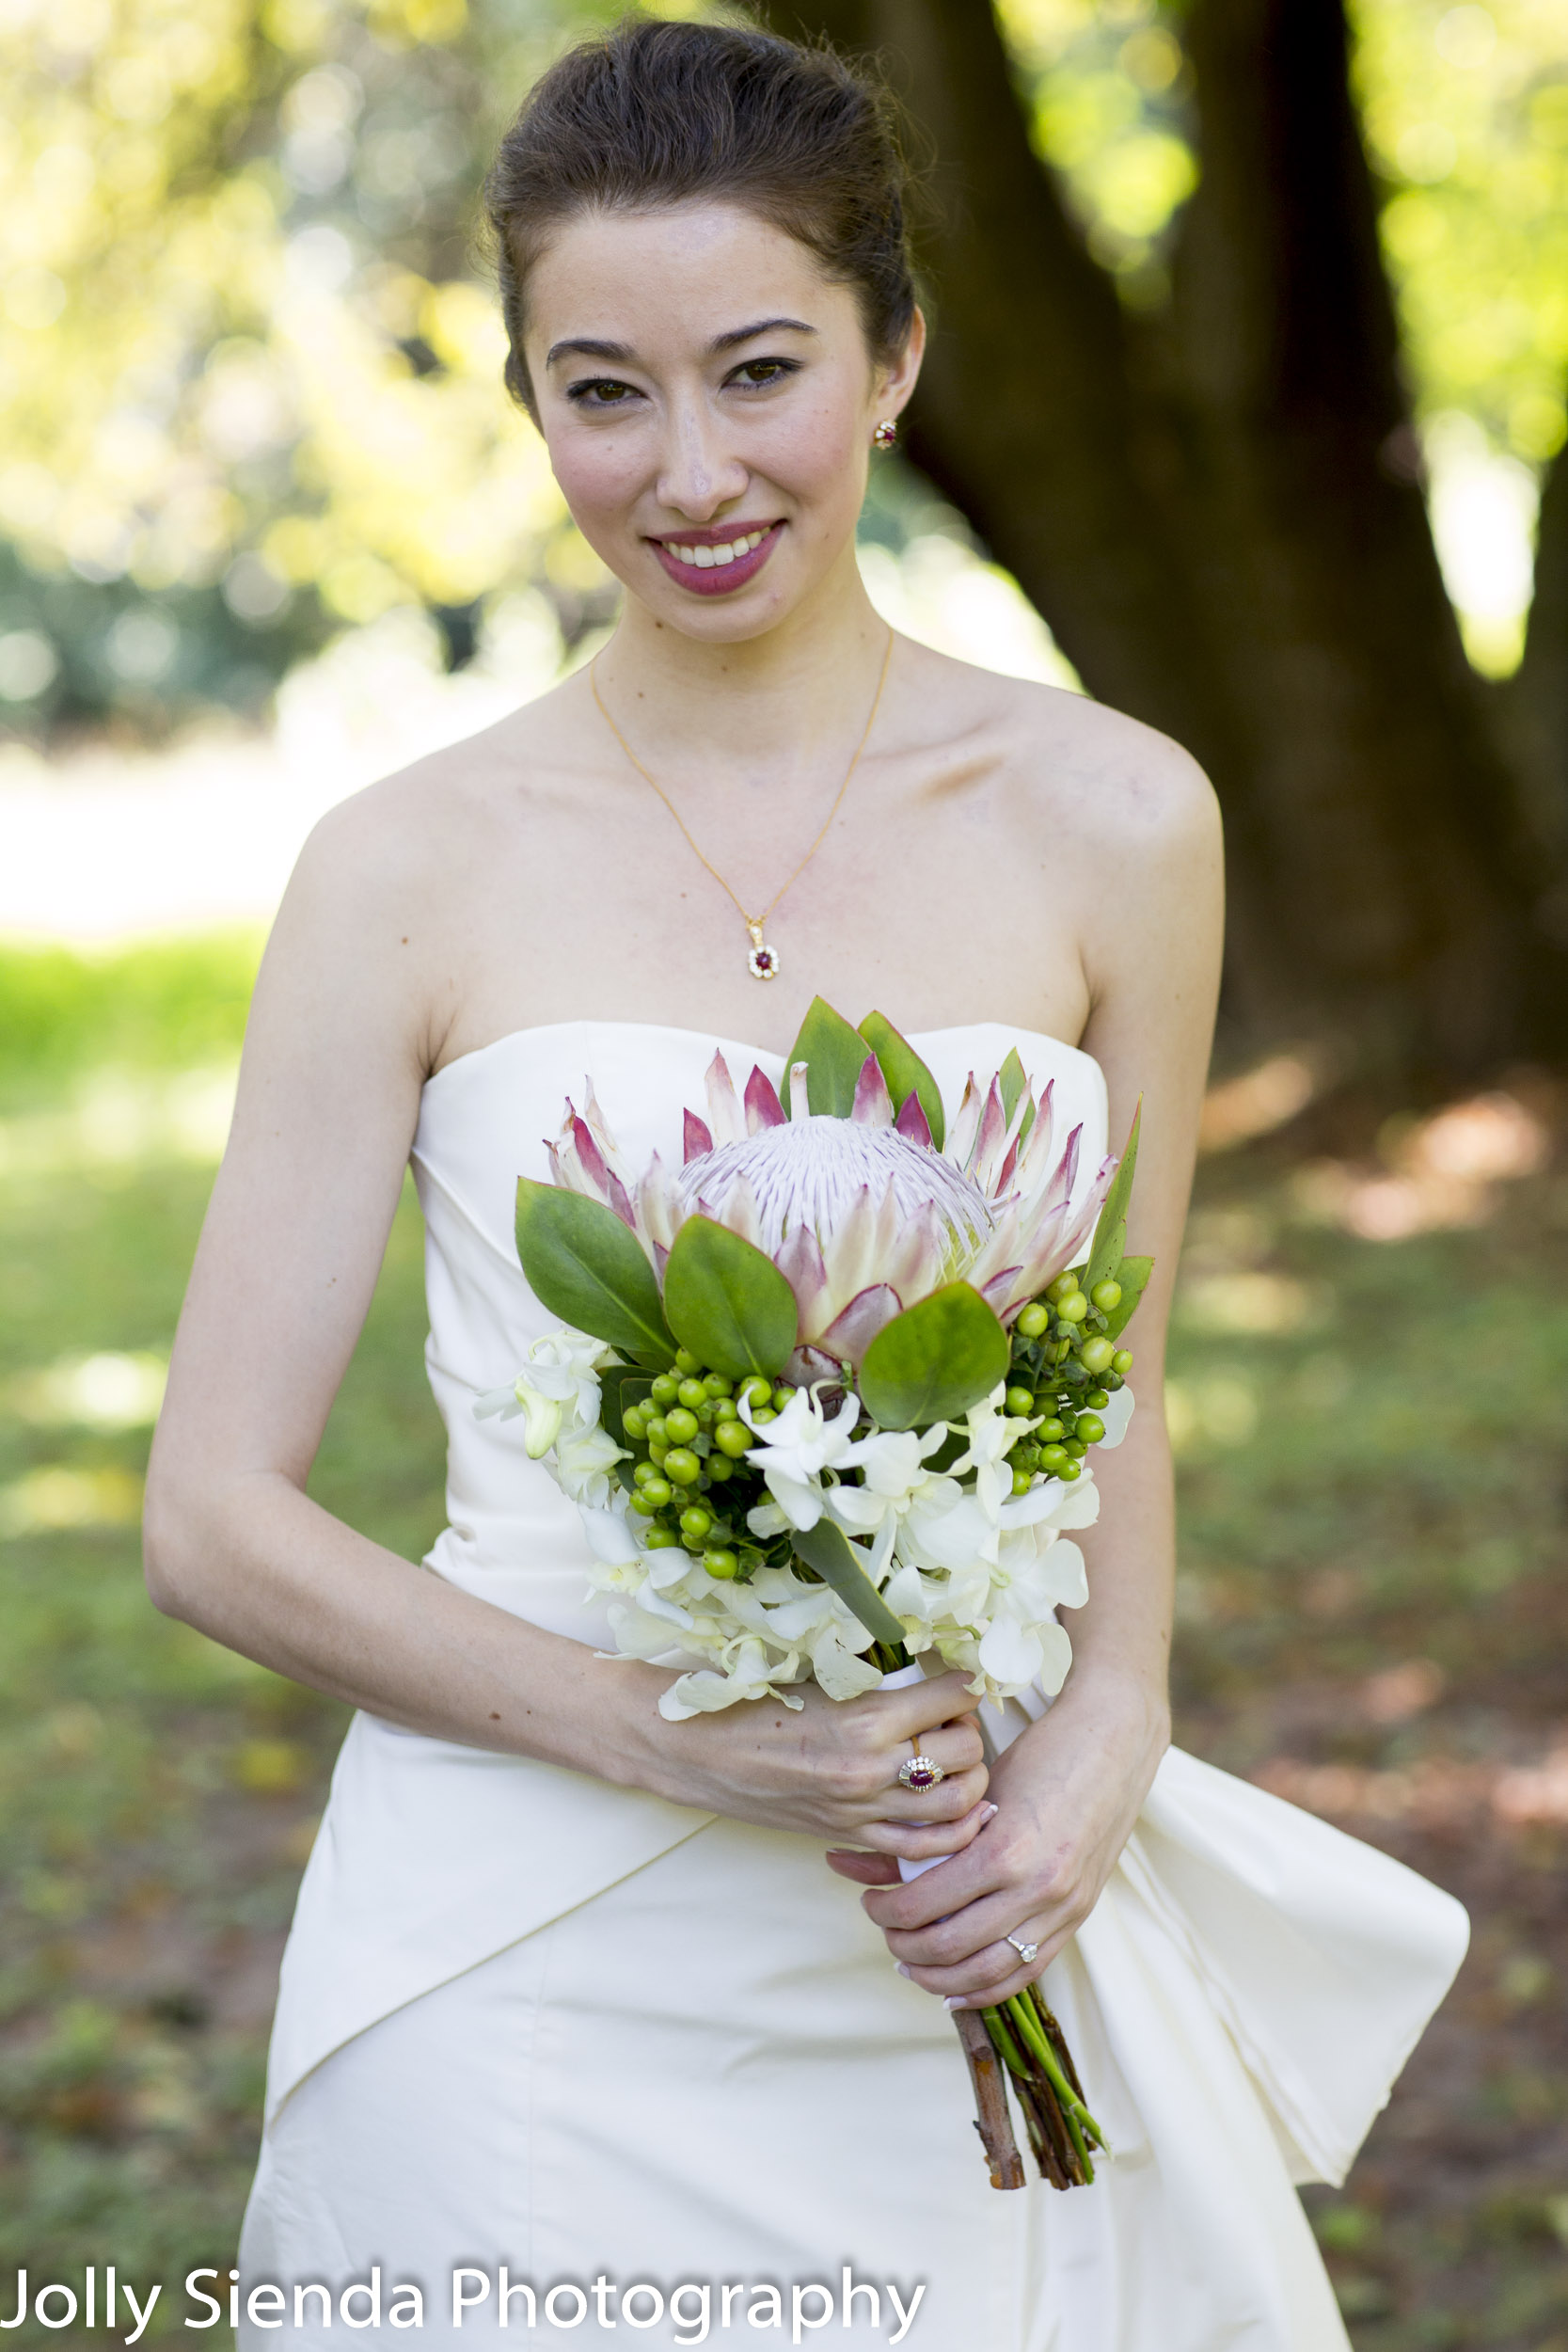 Portrait of a beautiful bride with her bouquet